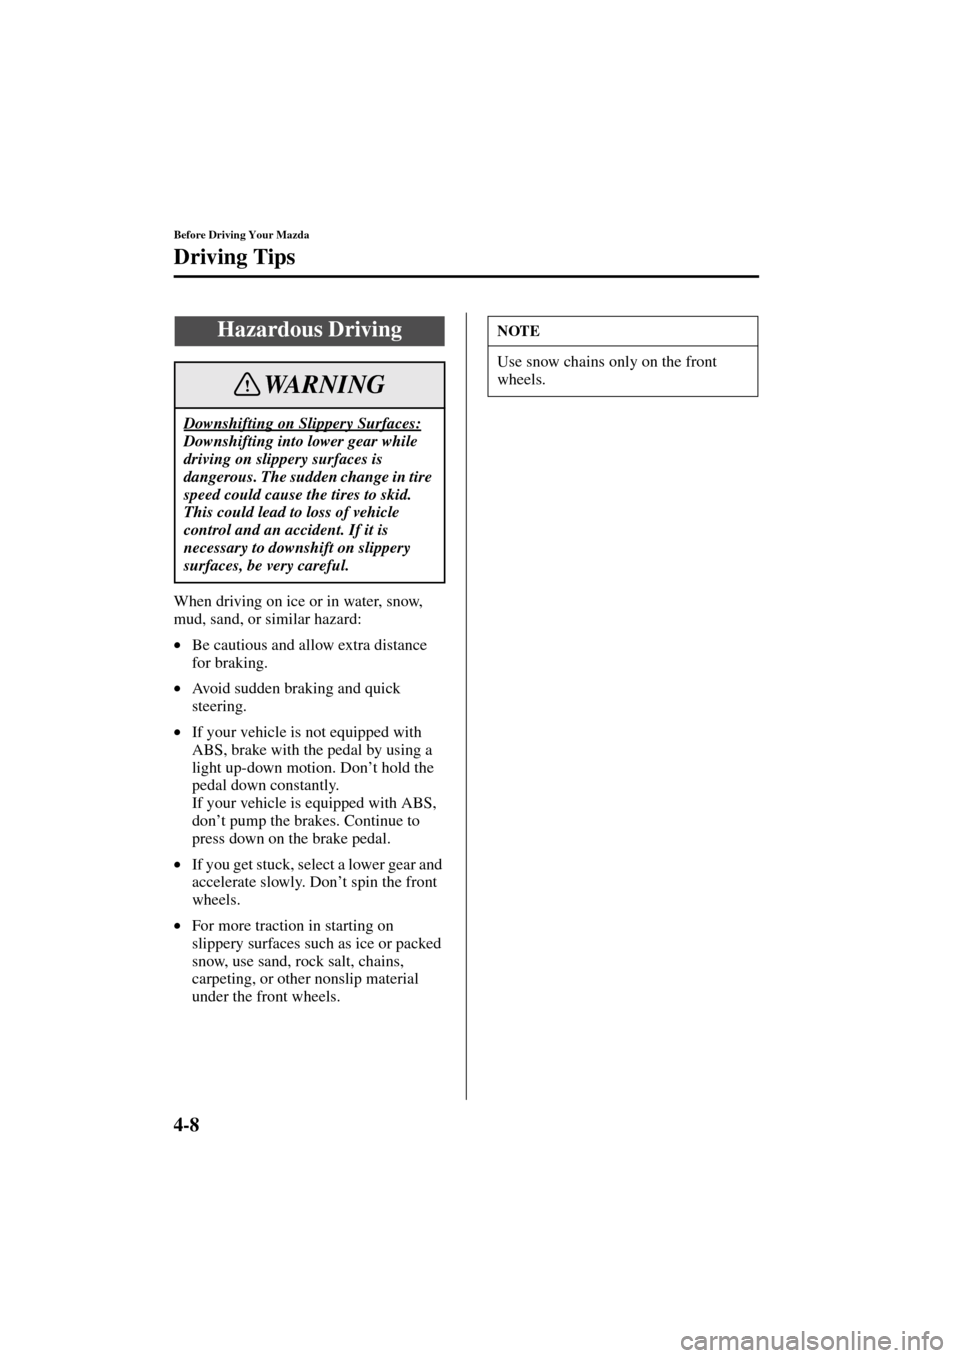 MAZDA MODEL 3 HATCHBACK 2004  Owners Manual (in English) 4-8
Before Driving Your Mazda
Driving Tips
Form No. 8S18-EA-03I
When driving on ice or in water, snow, 
mud, sand, or similar hazard:
•Be cautious and allow extra distance 
for braking.
•Avoid sud